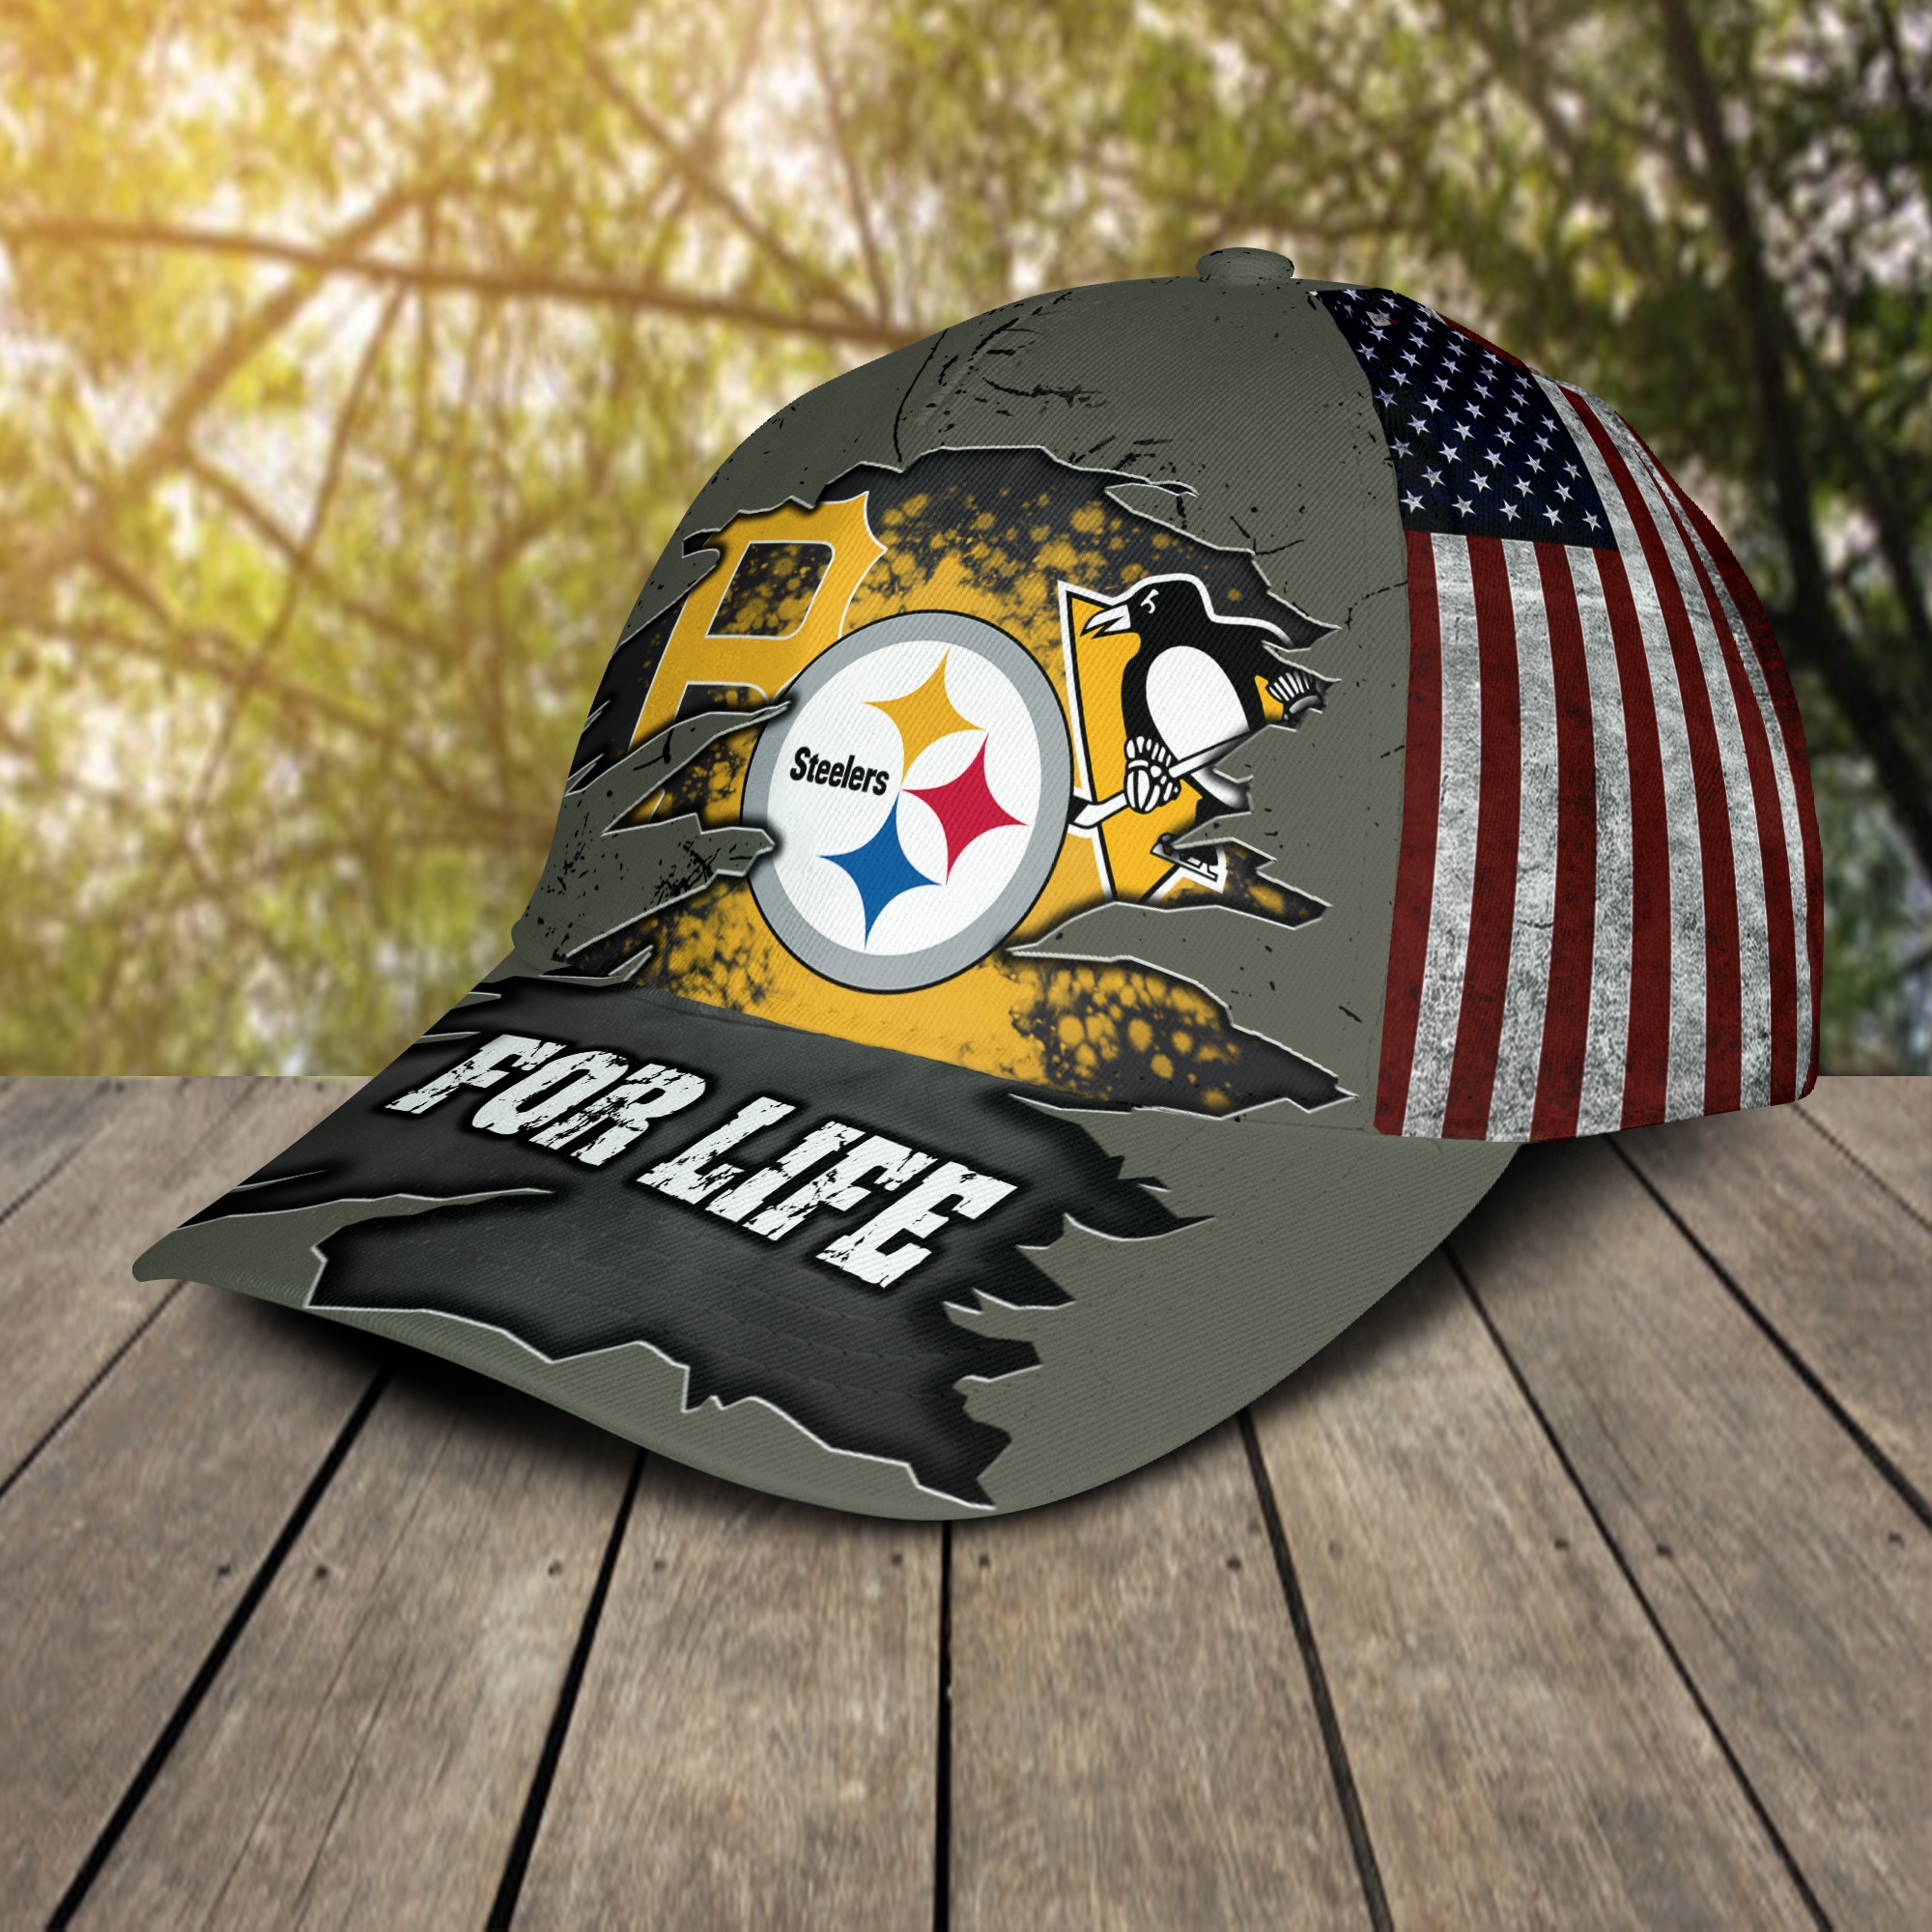 Pittsburgh sports team pirates steelers penguins for life cap 2